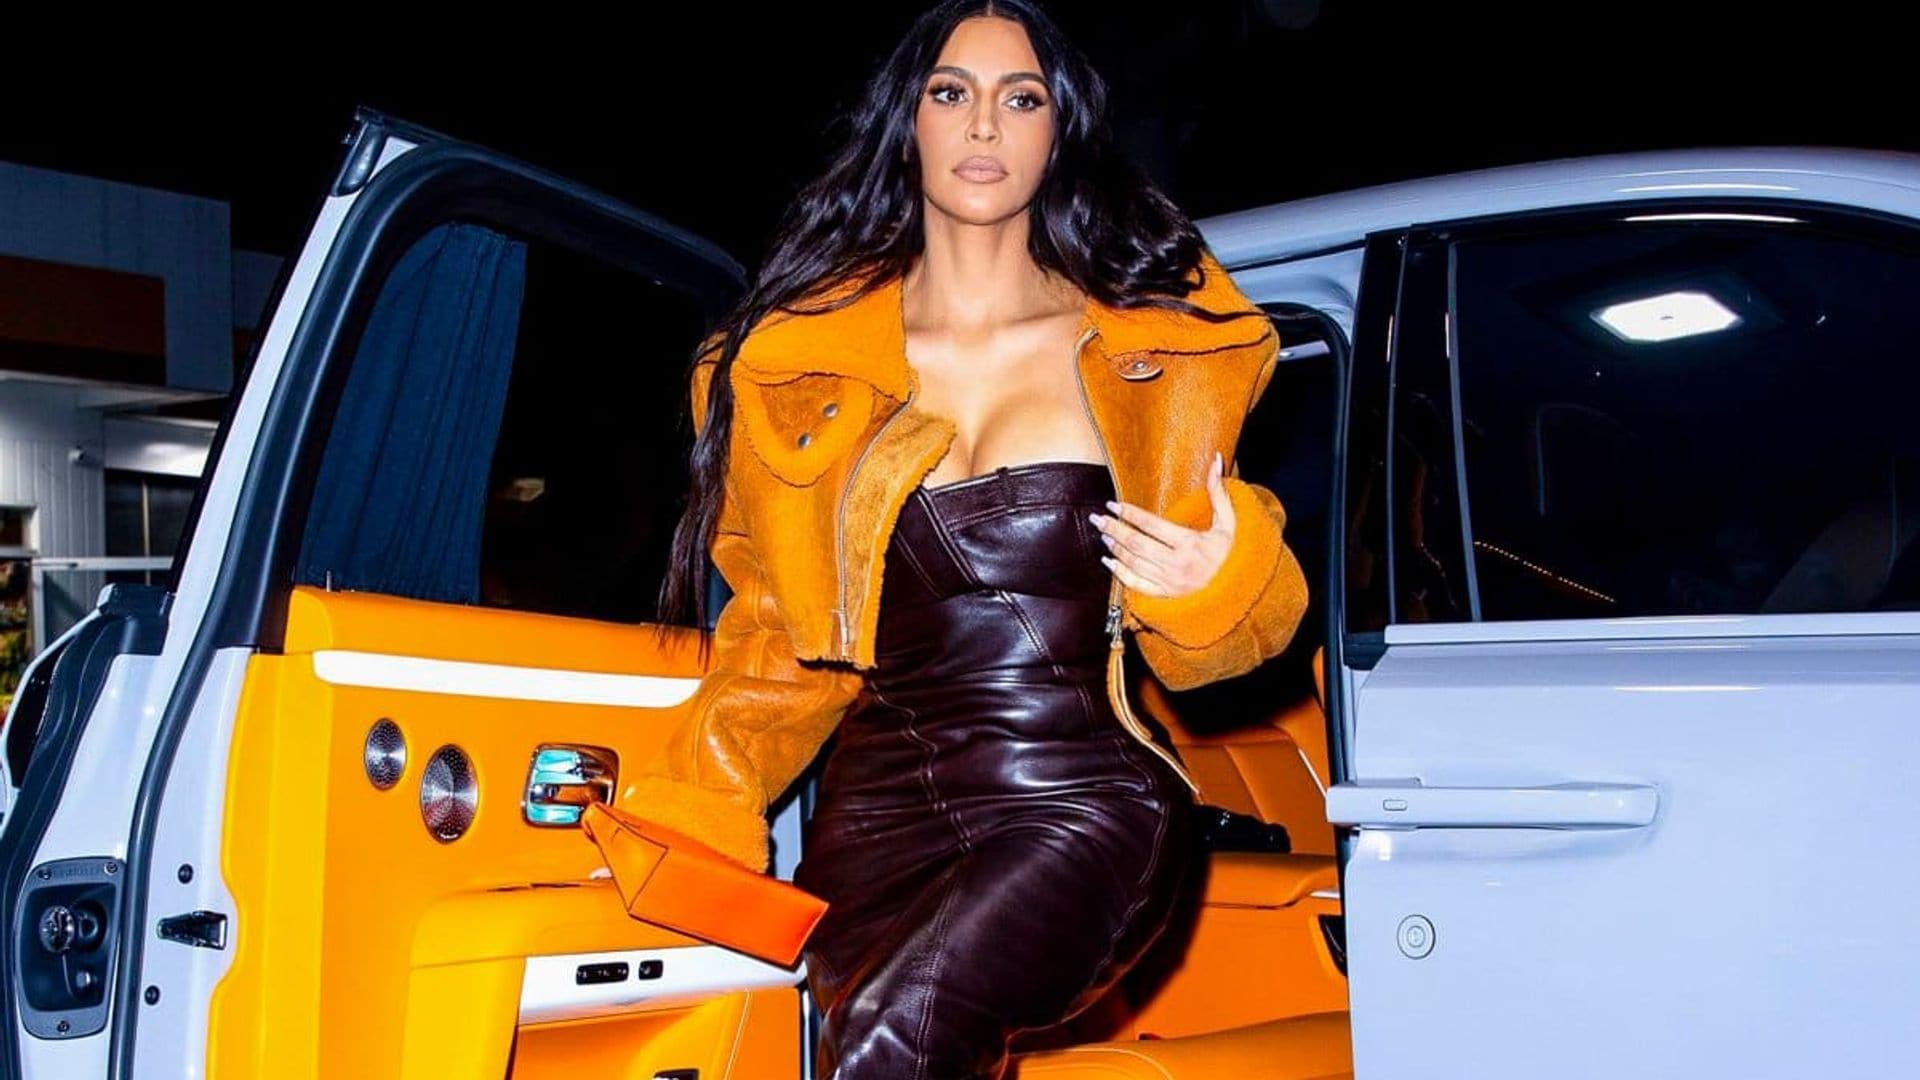 Kim Kardashian stops at the gas station while wearing her ex-husband Kanye West's YEEZY line